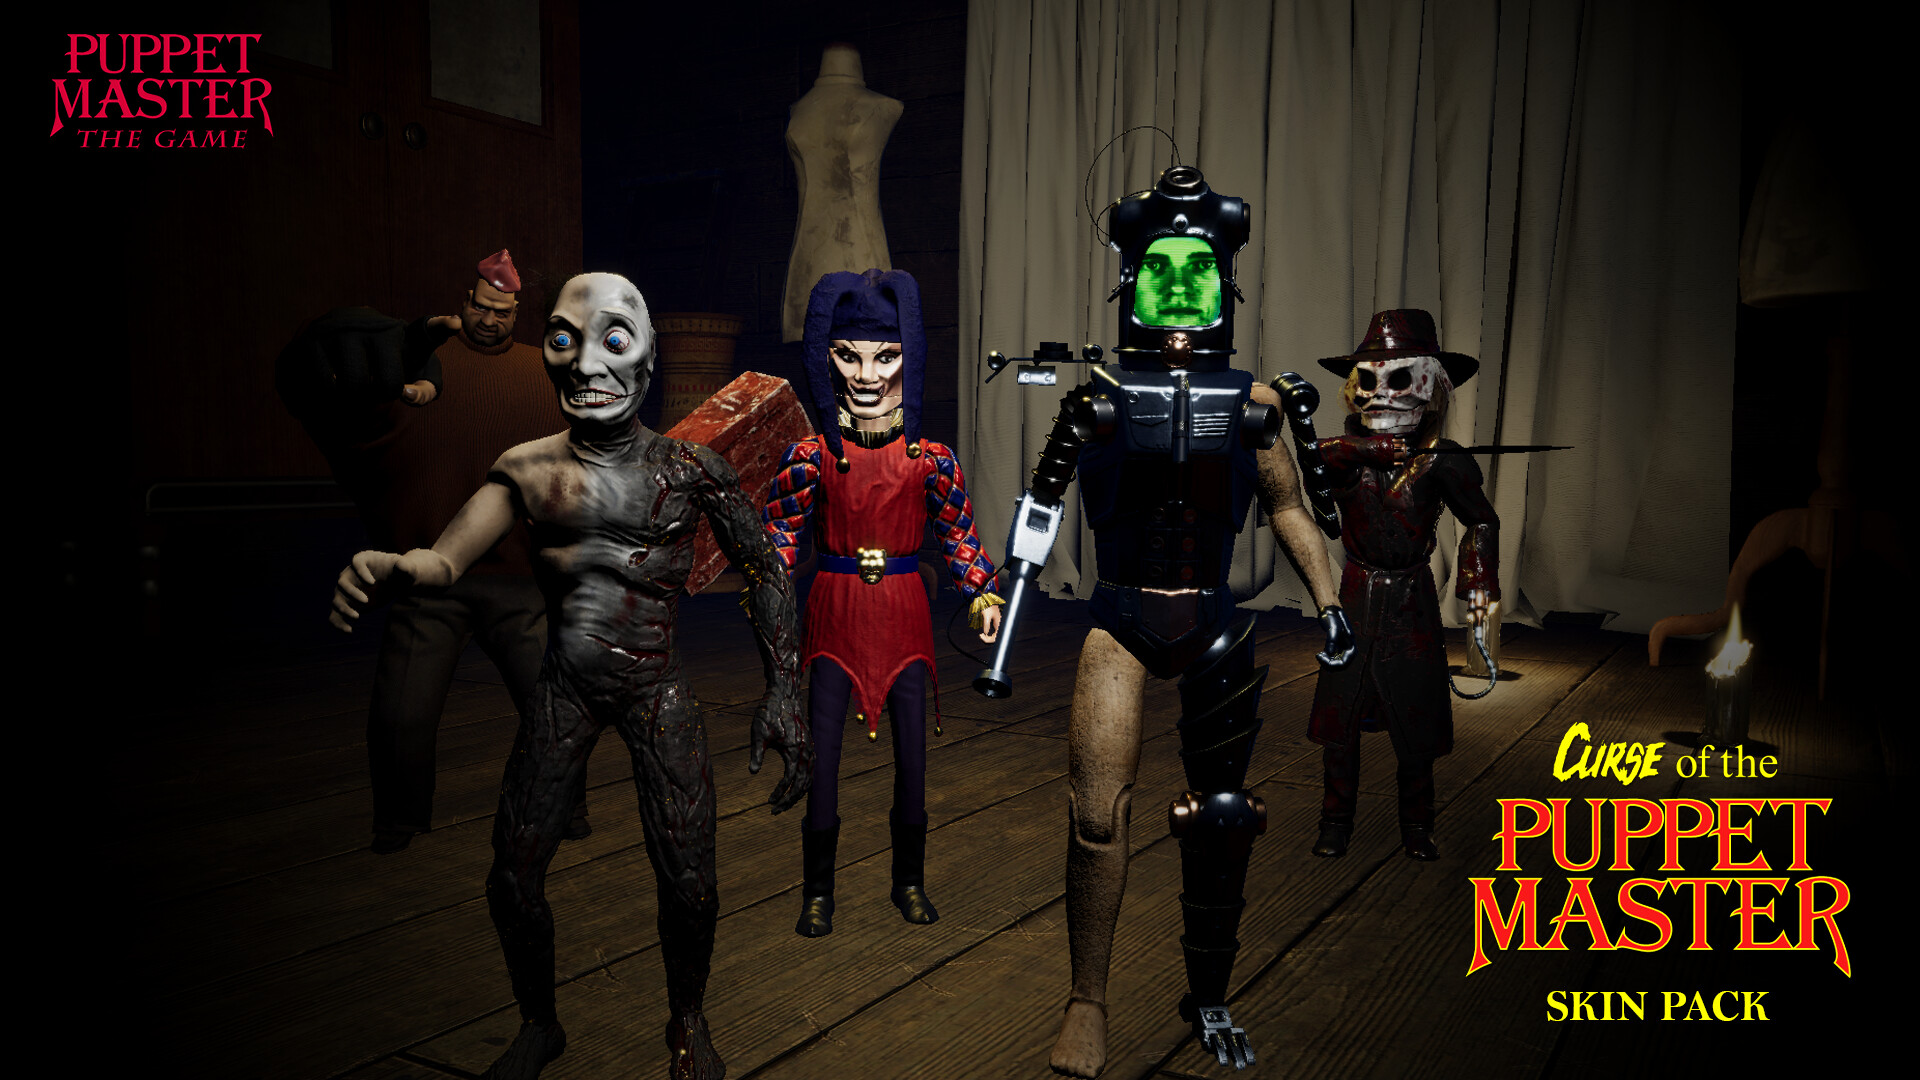 Puppet Master: The Game - Curse of the Puppet Master - Skin Pack Featured Screenshot #1